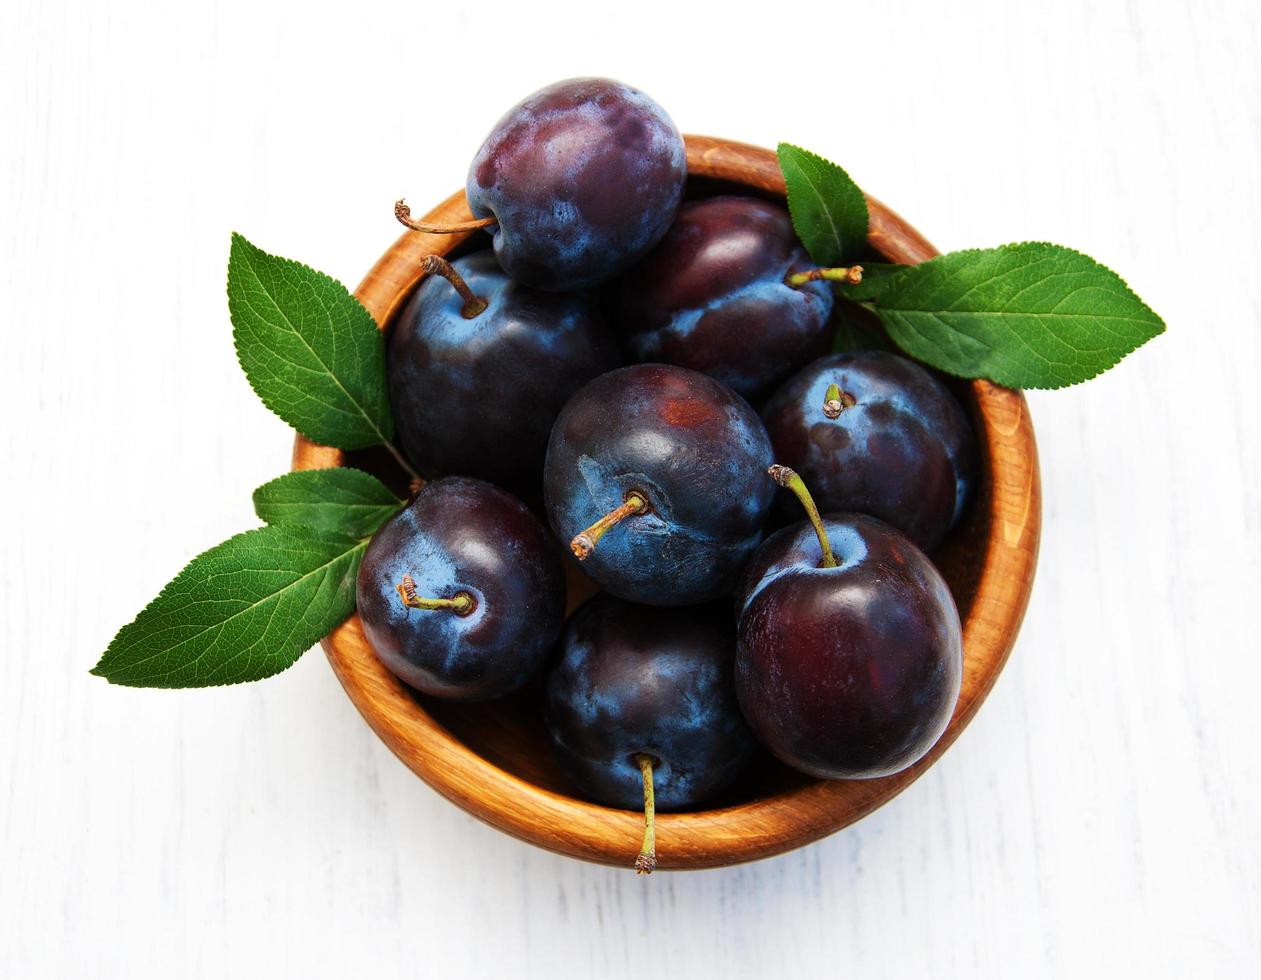 Sweet plums on a wooden background photo